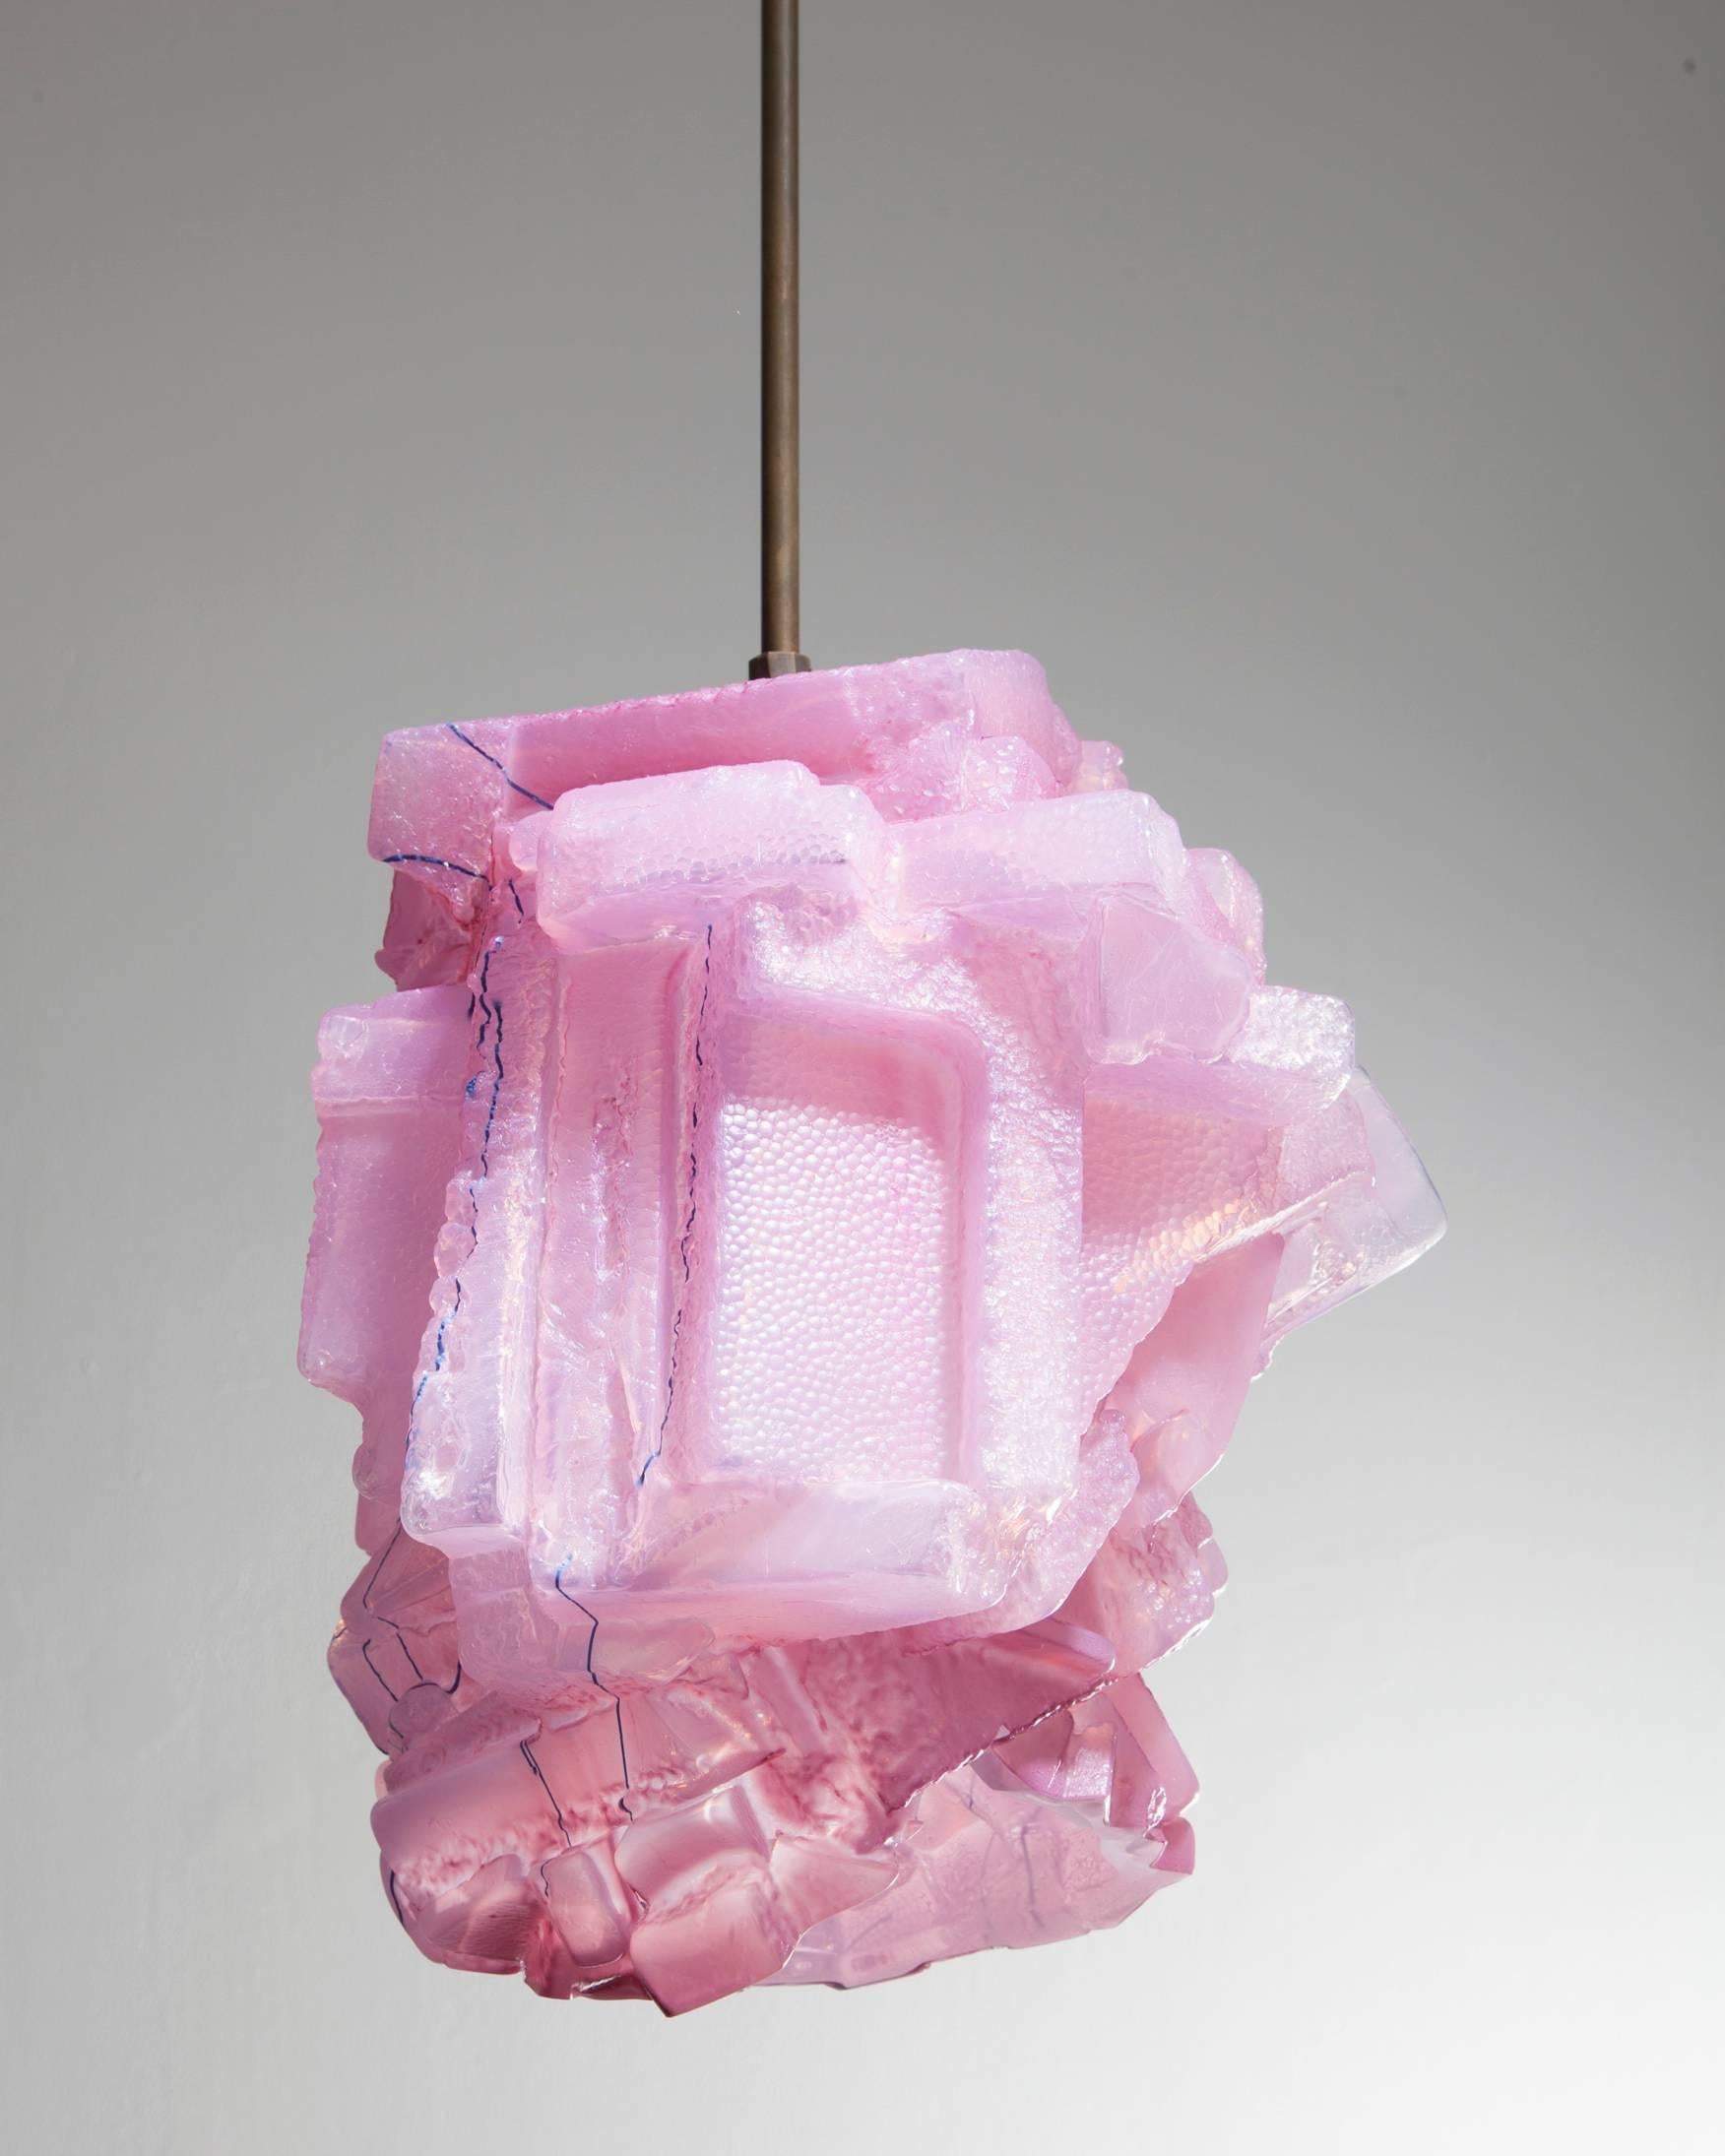 Hand-Crafted Unique Assemblage Pendant Lamp in Handblown Glass by Thaddeus Wolfe, 2015